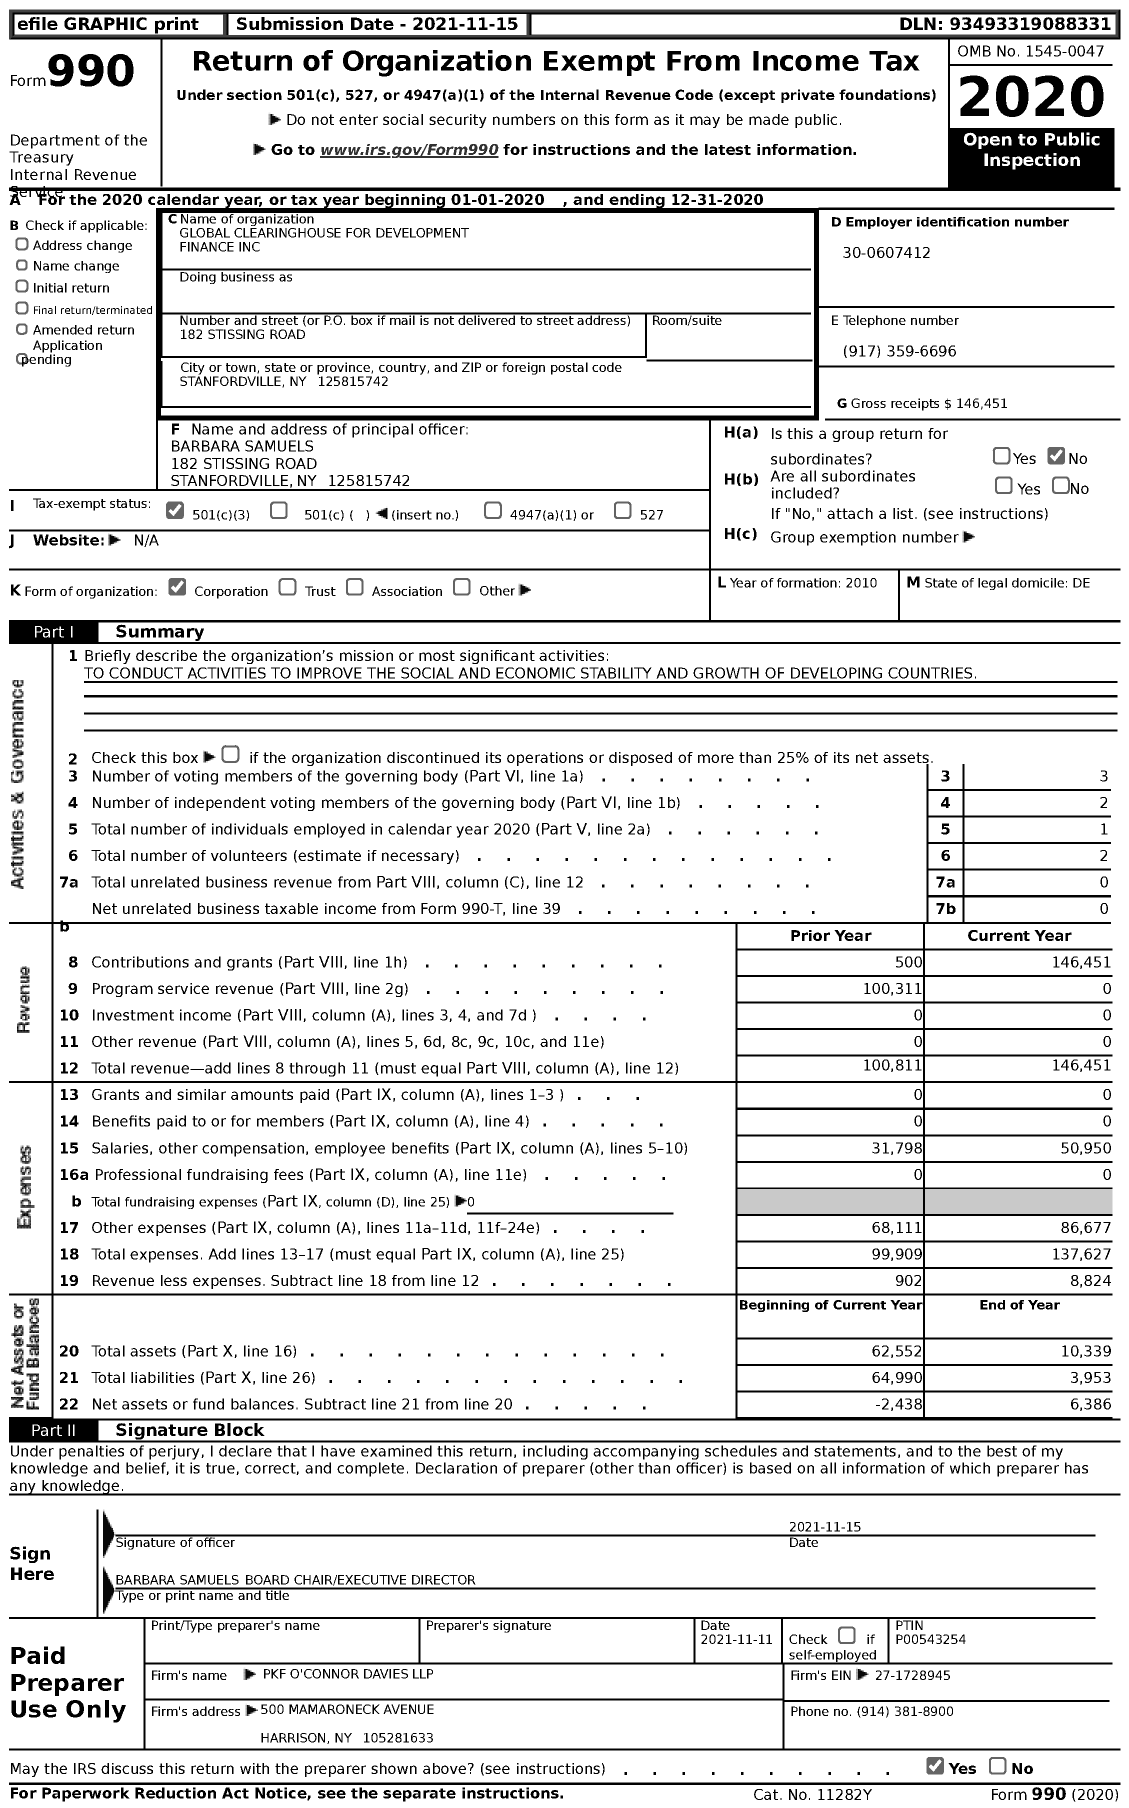 Image of first page of 2020 Form 990 for Global Clearinghouse for Development Finance